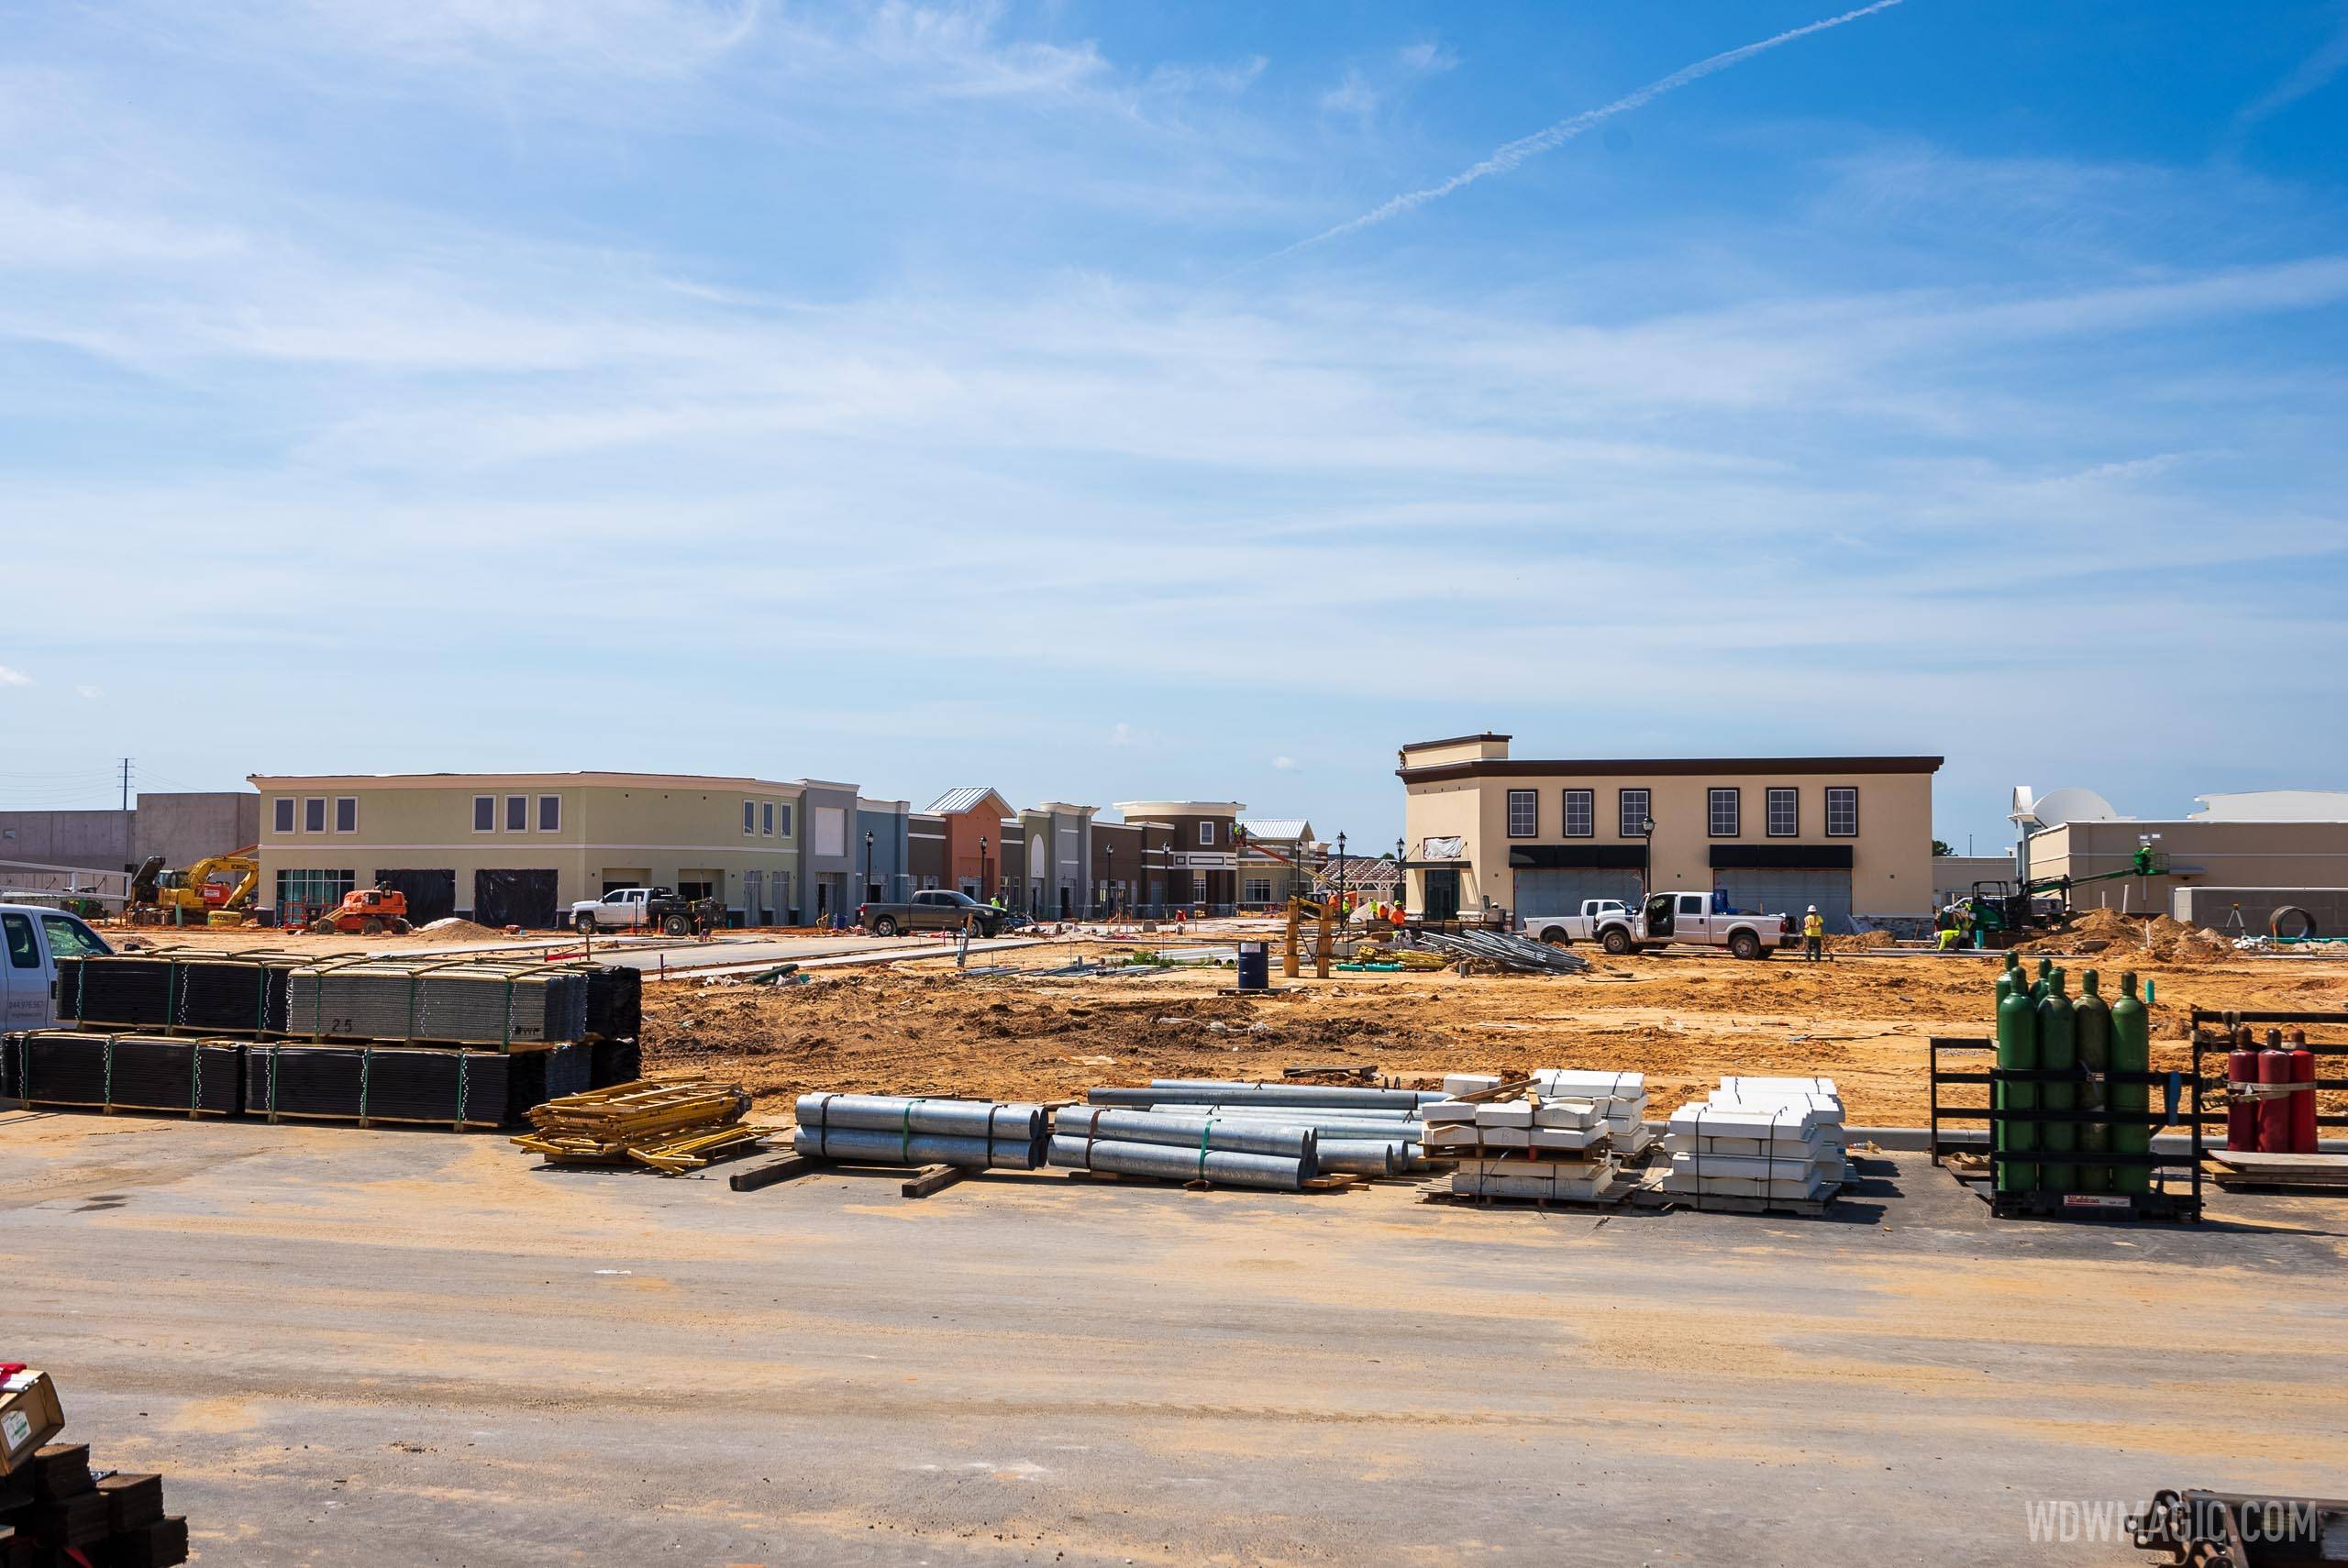 Flamingo Crossings Town Center construction - May 2021